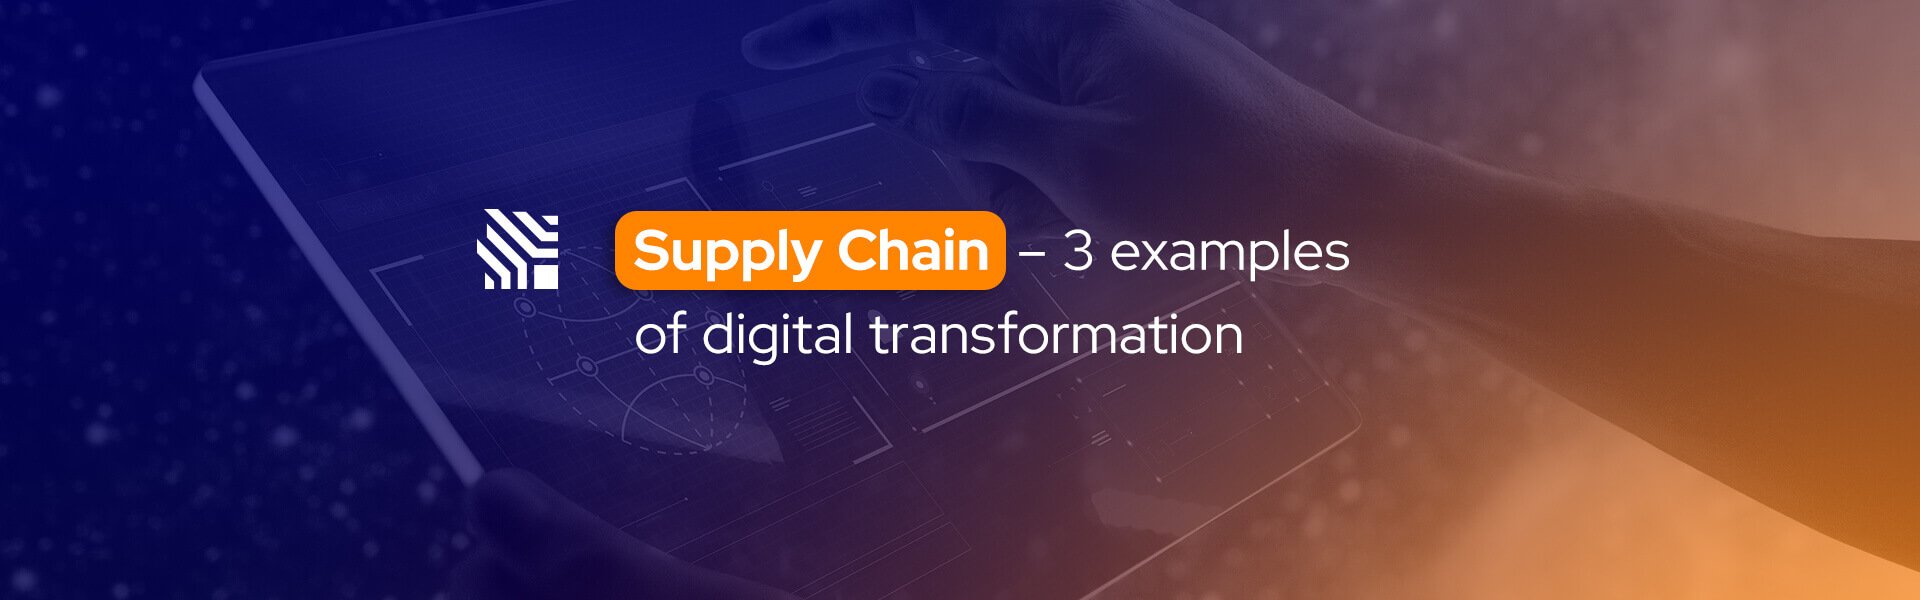 Supply Chain - 3 examples of digital transformation